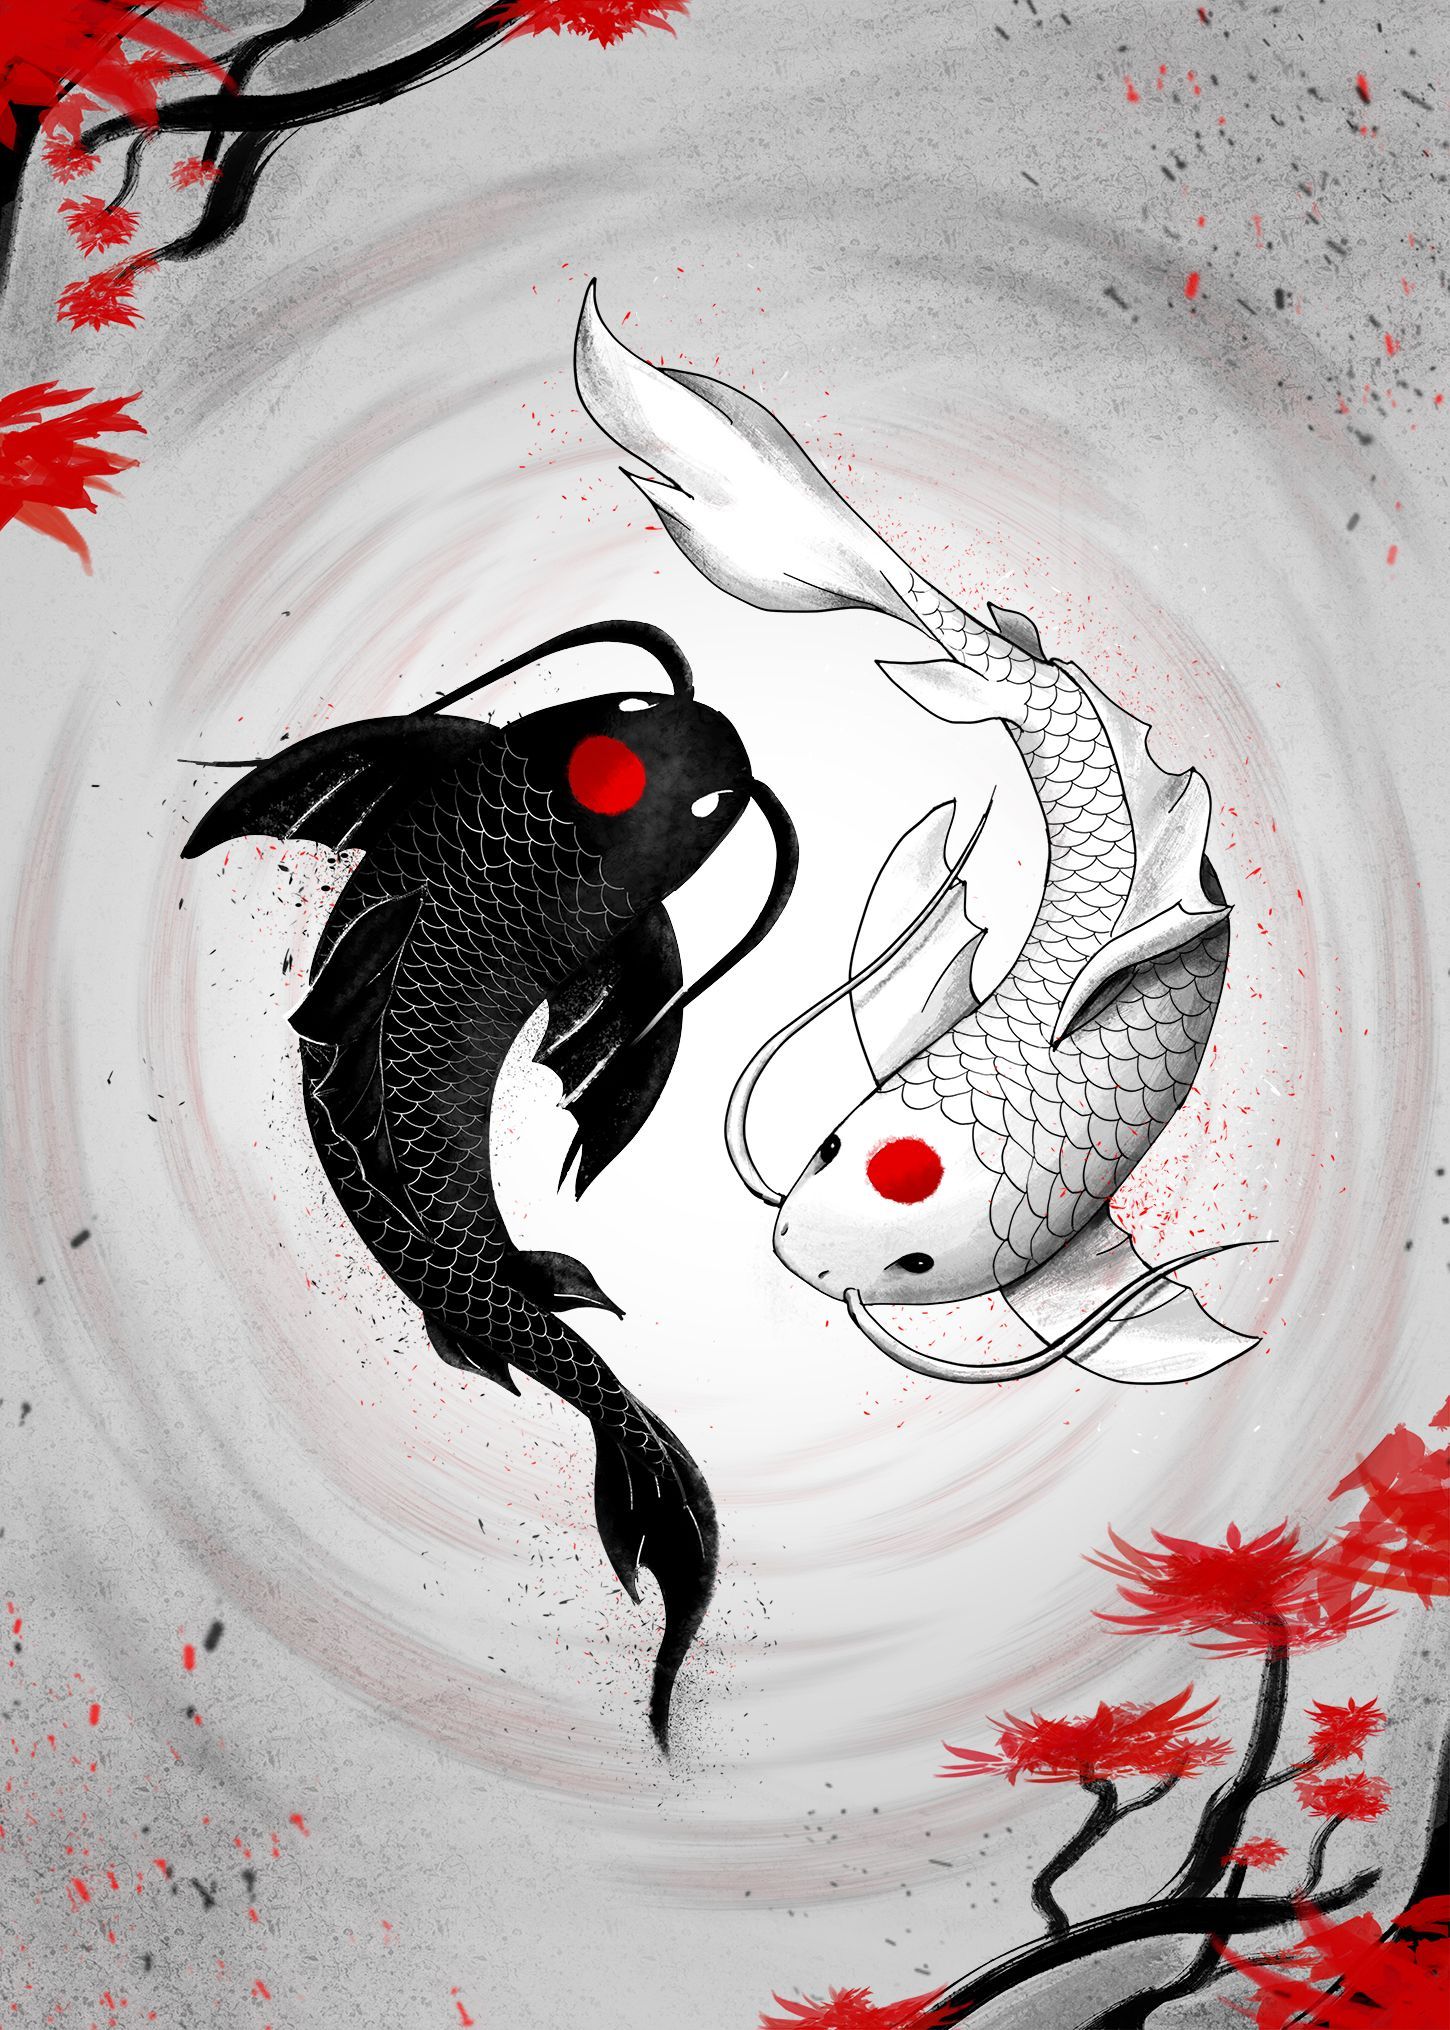 Details more than 54 koi wallpaper - in.cdgdbentre